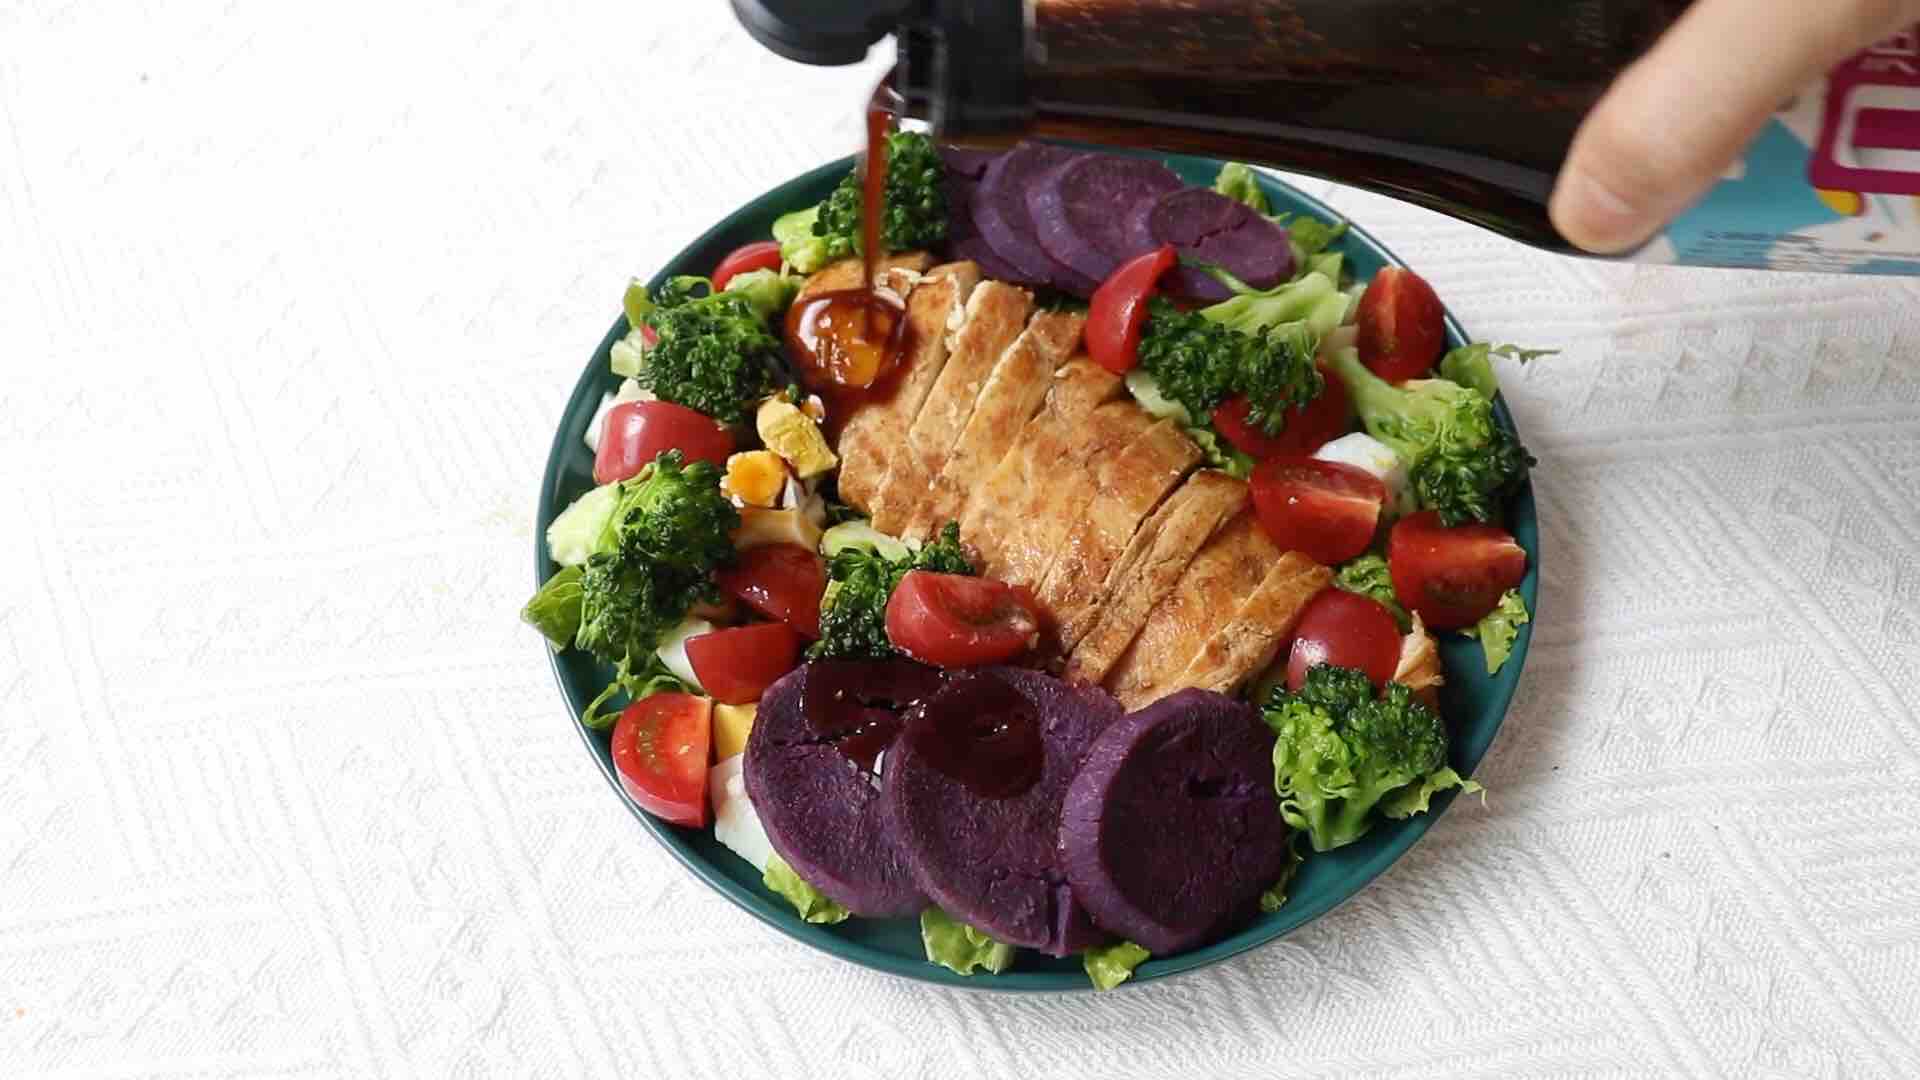 Chicken Breast and Vegetable Salad recipe